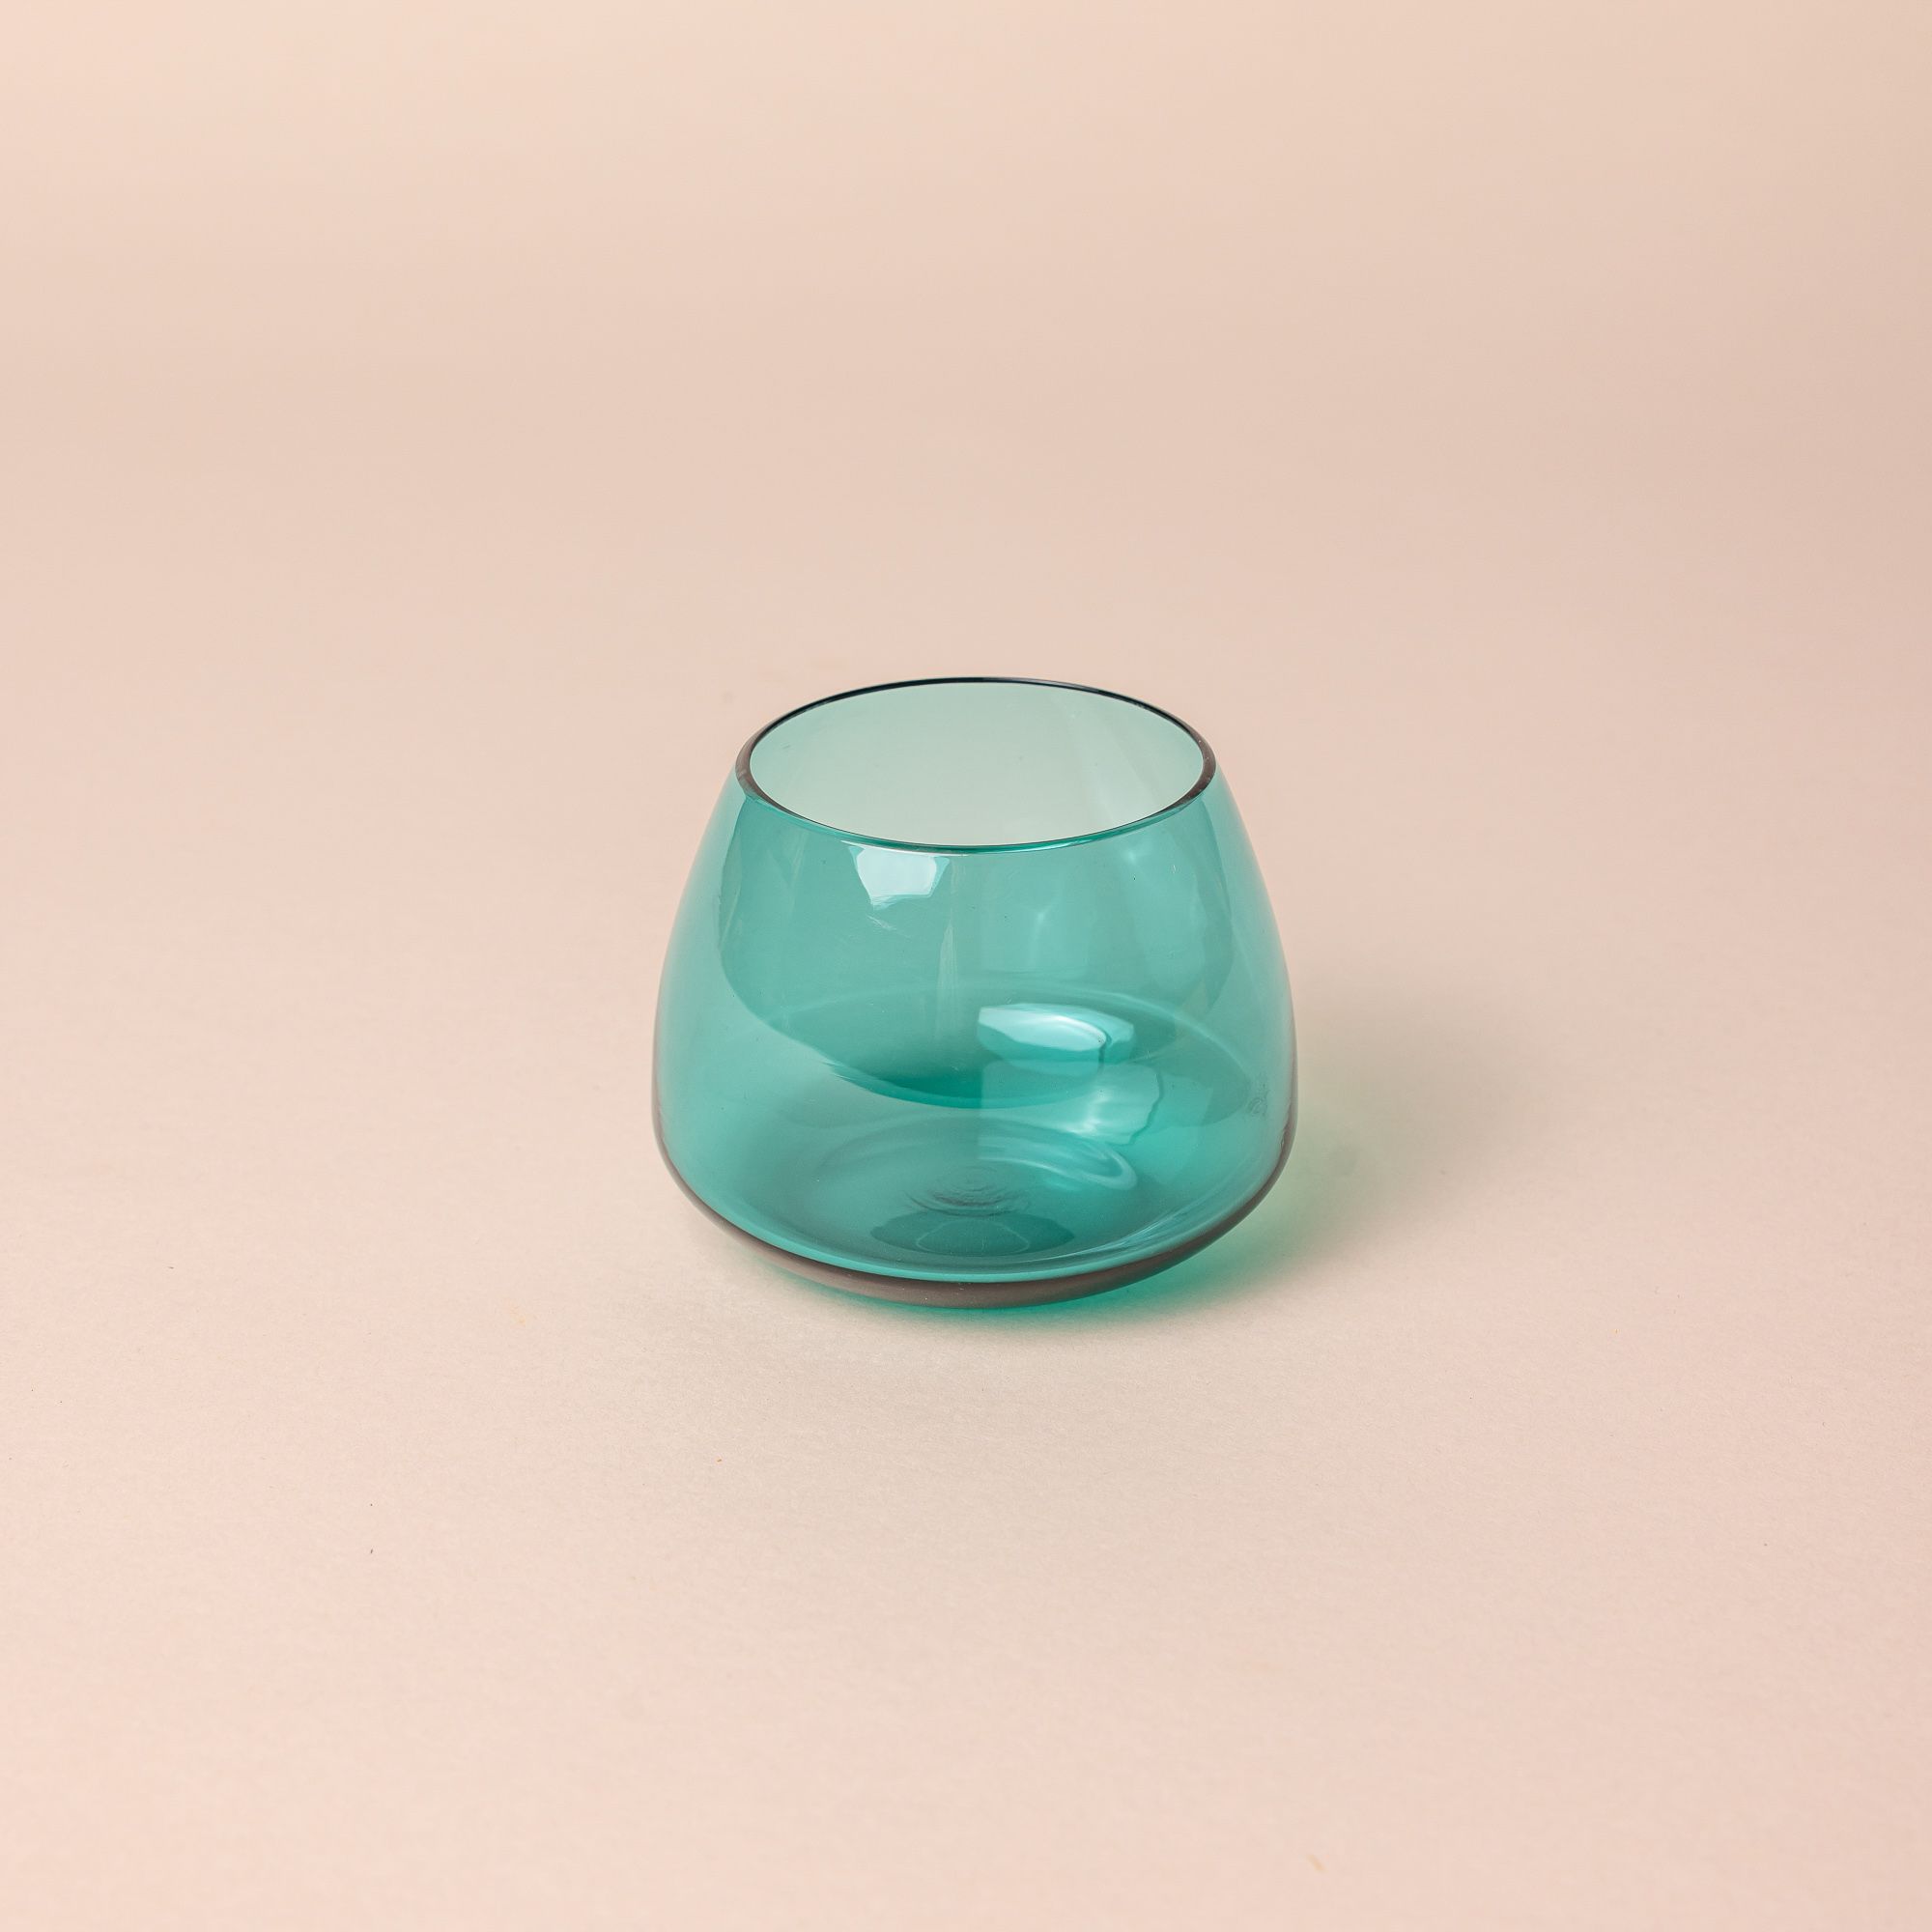 A round short aqua blue glass punch cup with a round base that narrows a bit near the top..